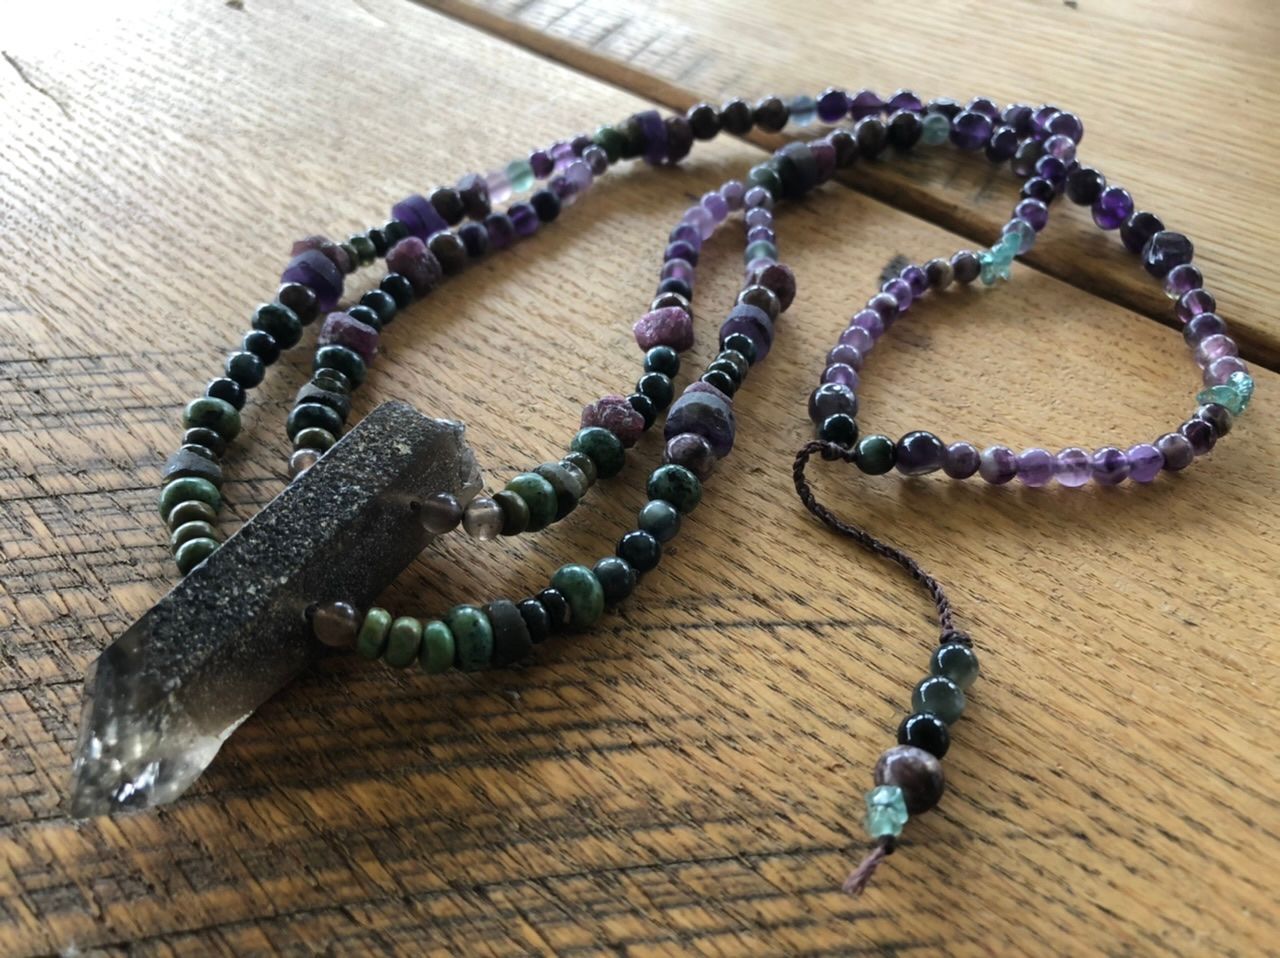 A necklace of purple, green and grey stones and crystals rests on an oak table